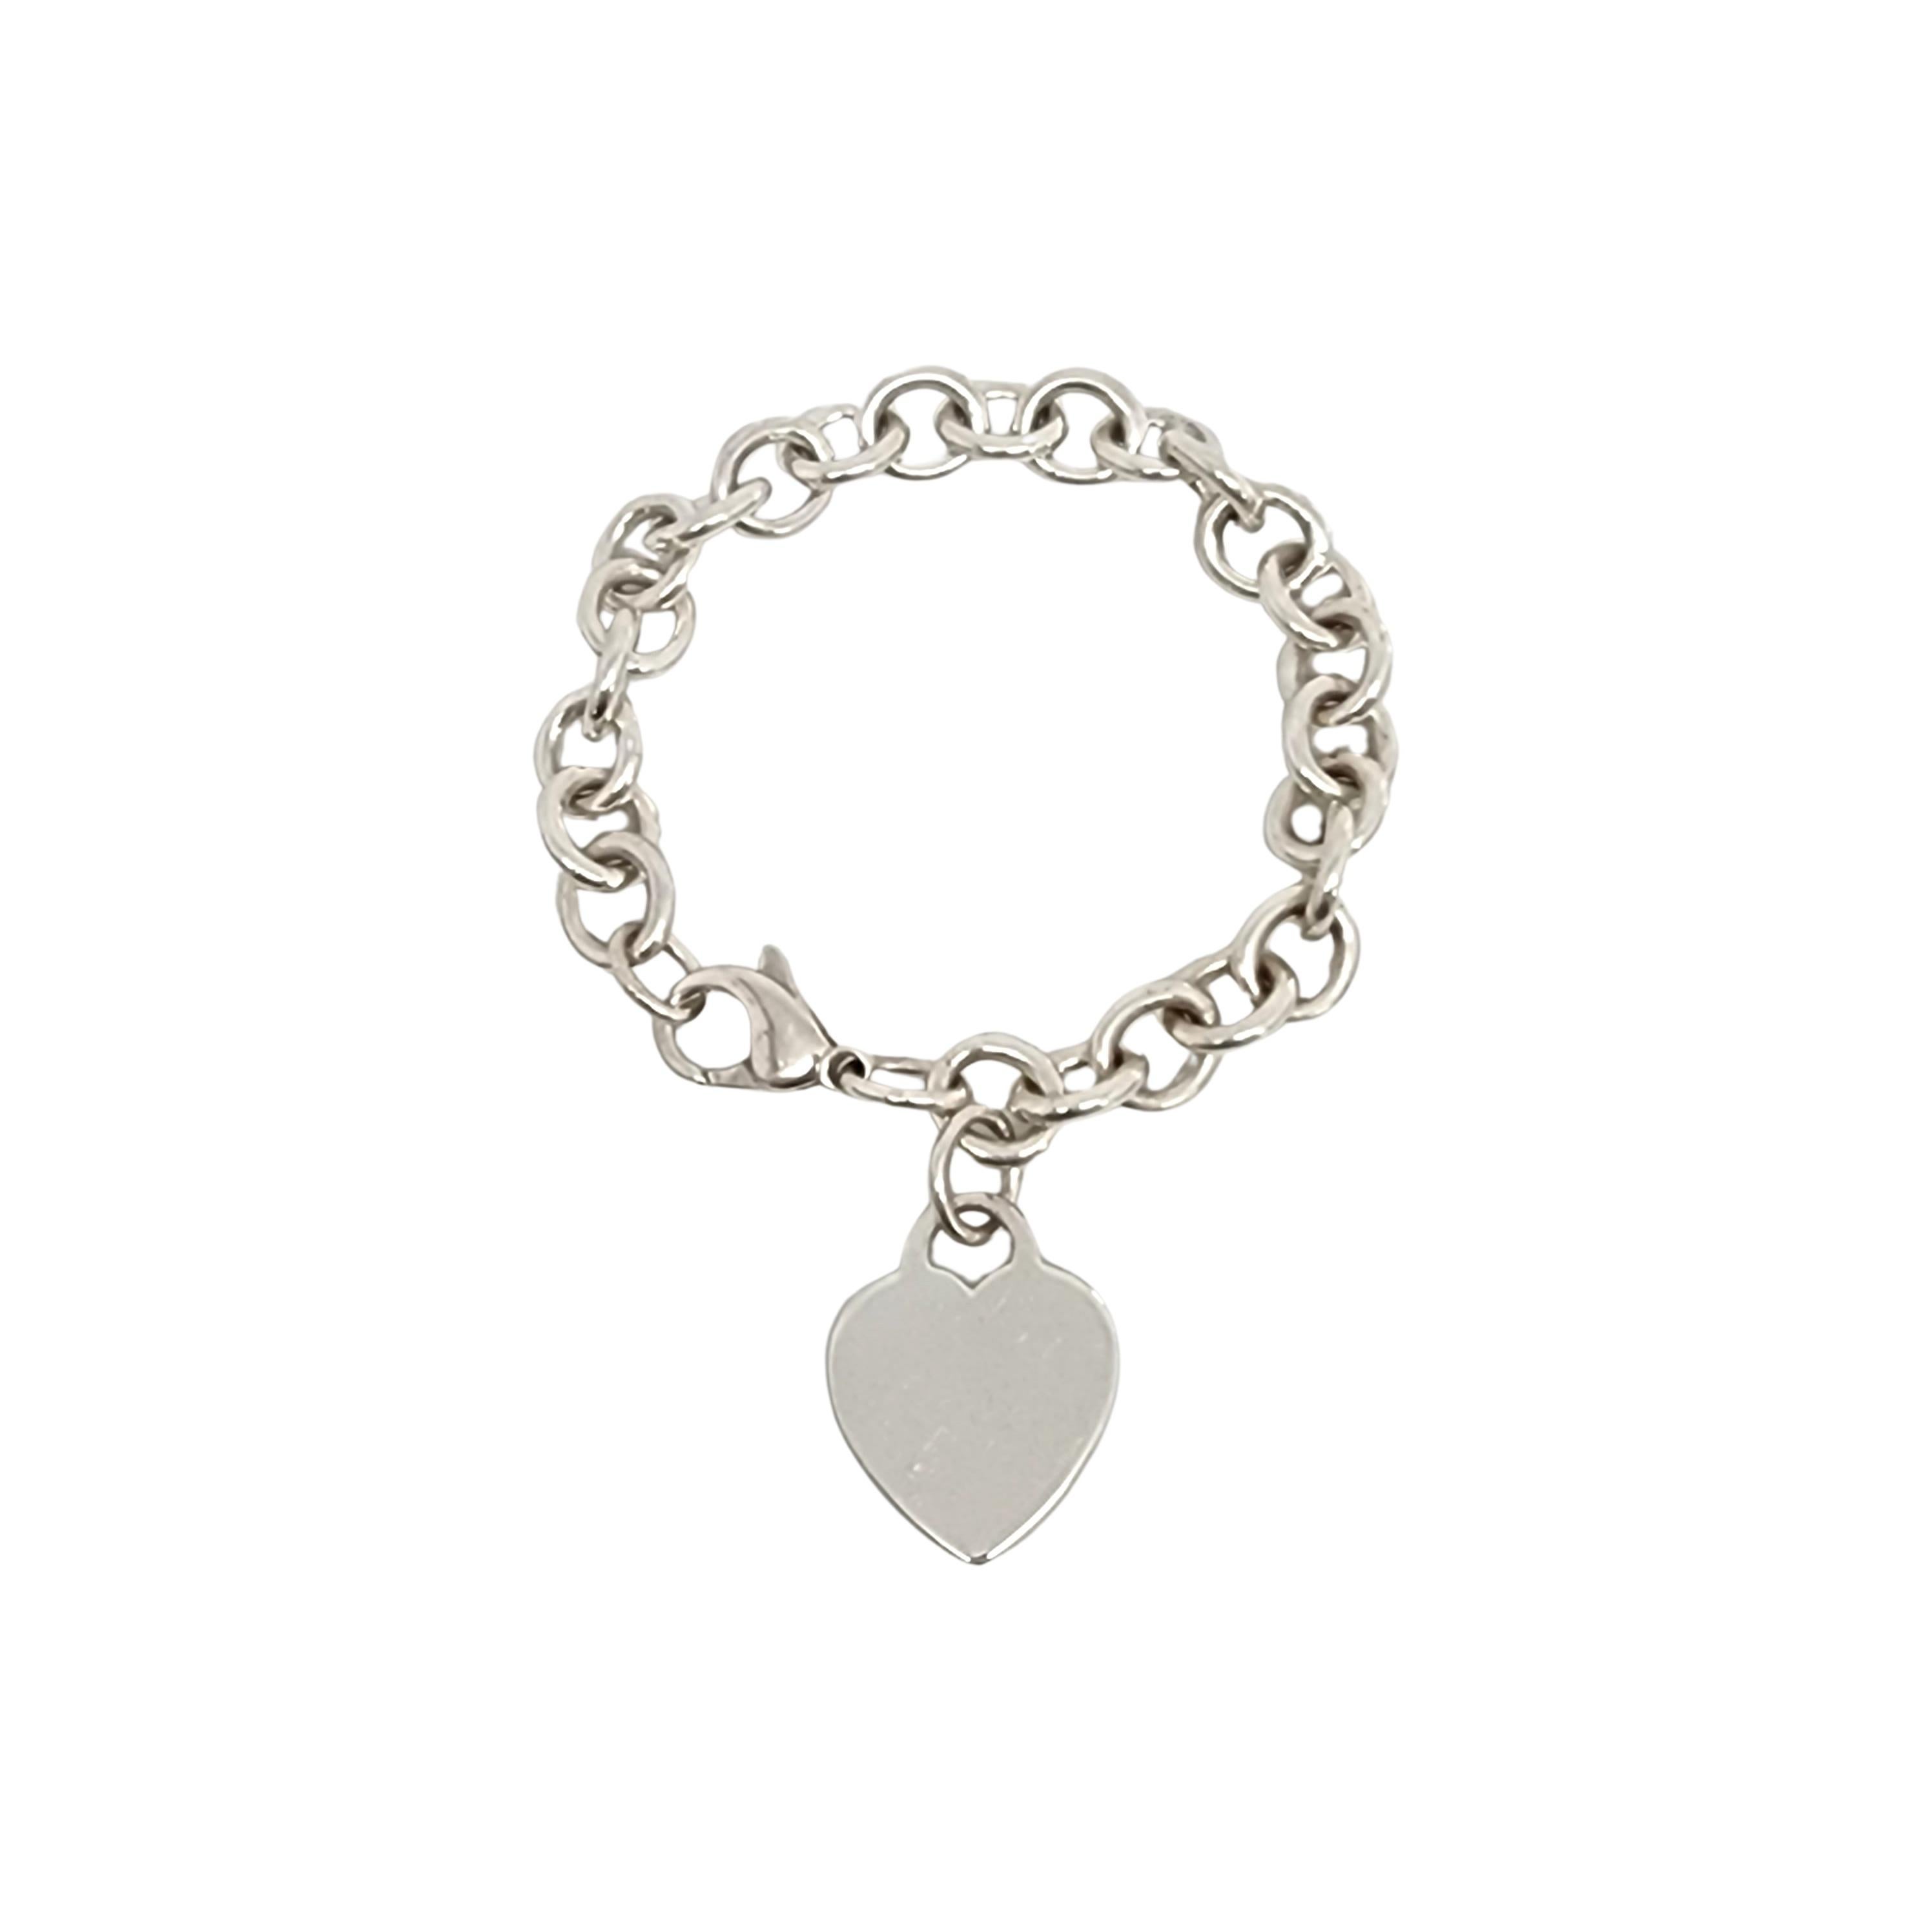 Tiffany & Co sterling silver rolo link bracelet with blank heart tag.

Authentic Tiffany bracelet featuring rolo links with a lobster claw closure. Smooth polished blank heart tag dangles from a rolo link. Does not include Tiffany & Co box or